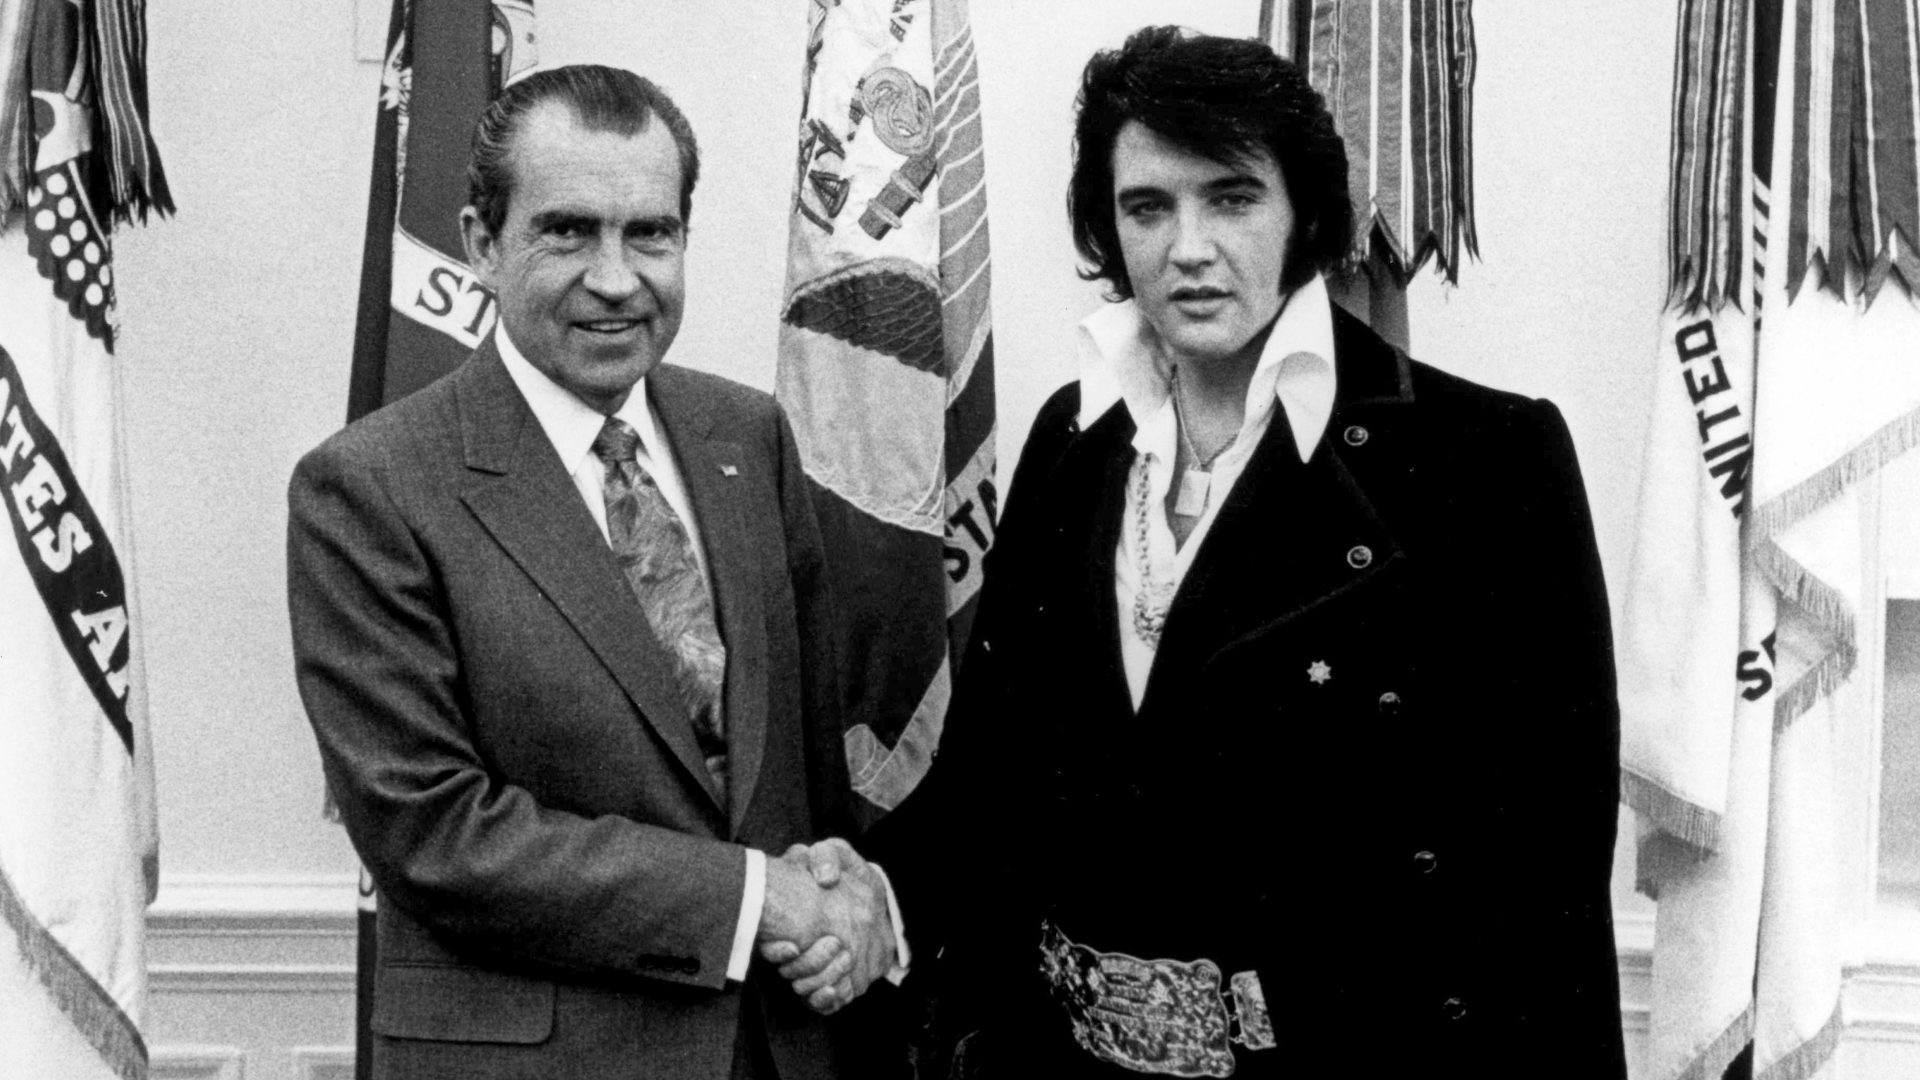 Elvis meets President Richard Nixon at the White House in December 1970. Photo: National Archives